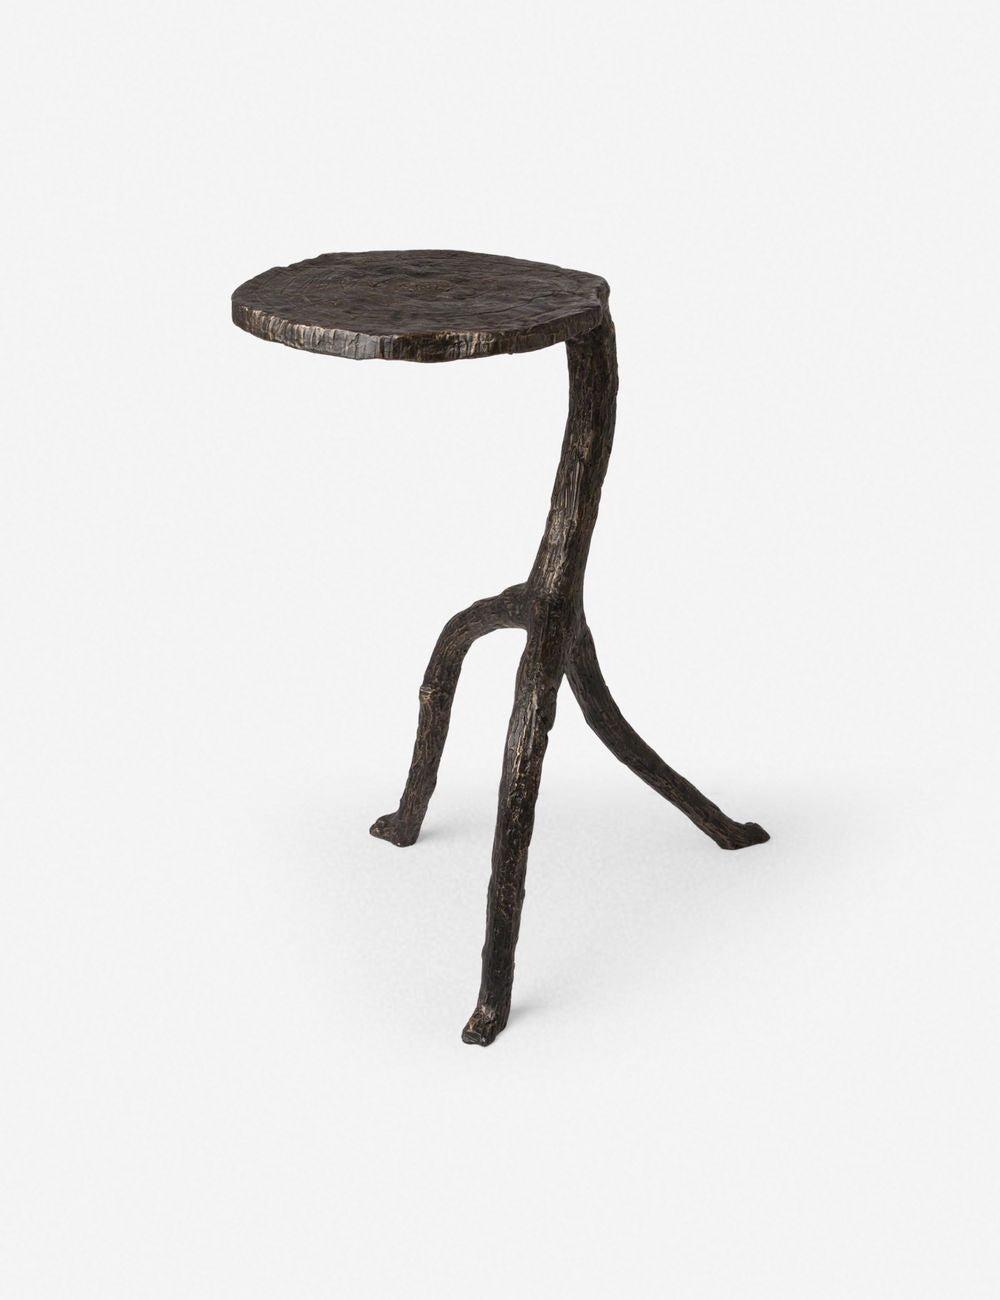 Whimsical Round Wood-Grain Cast Iron Side Table, Antique Bronze